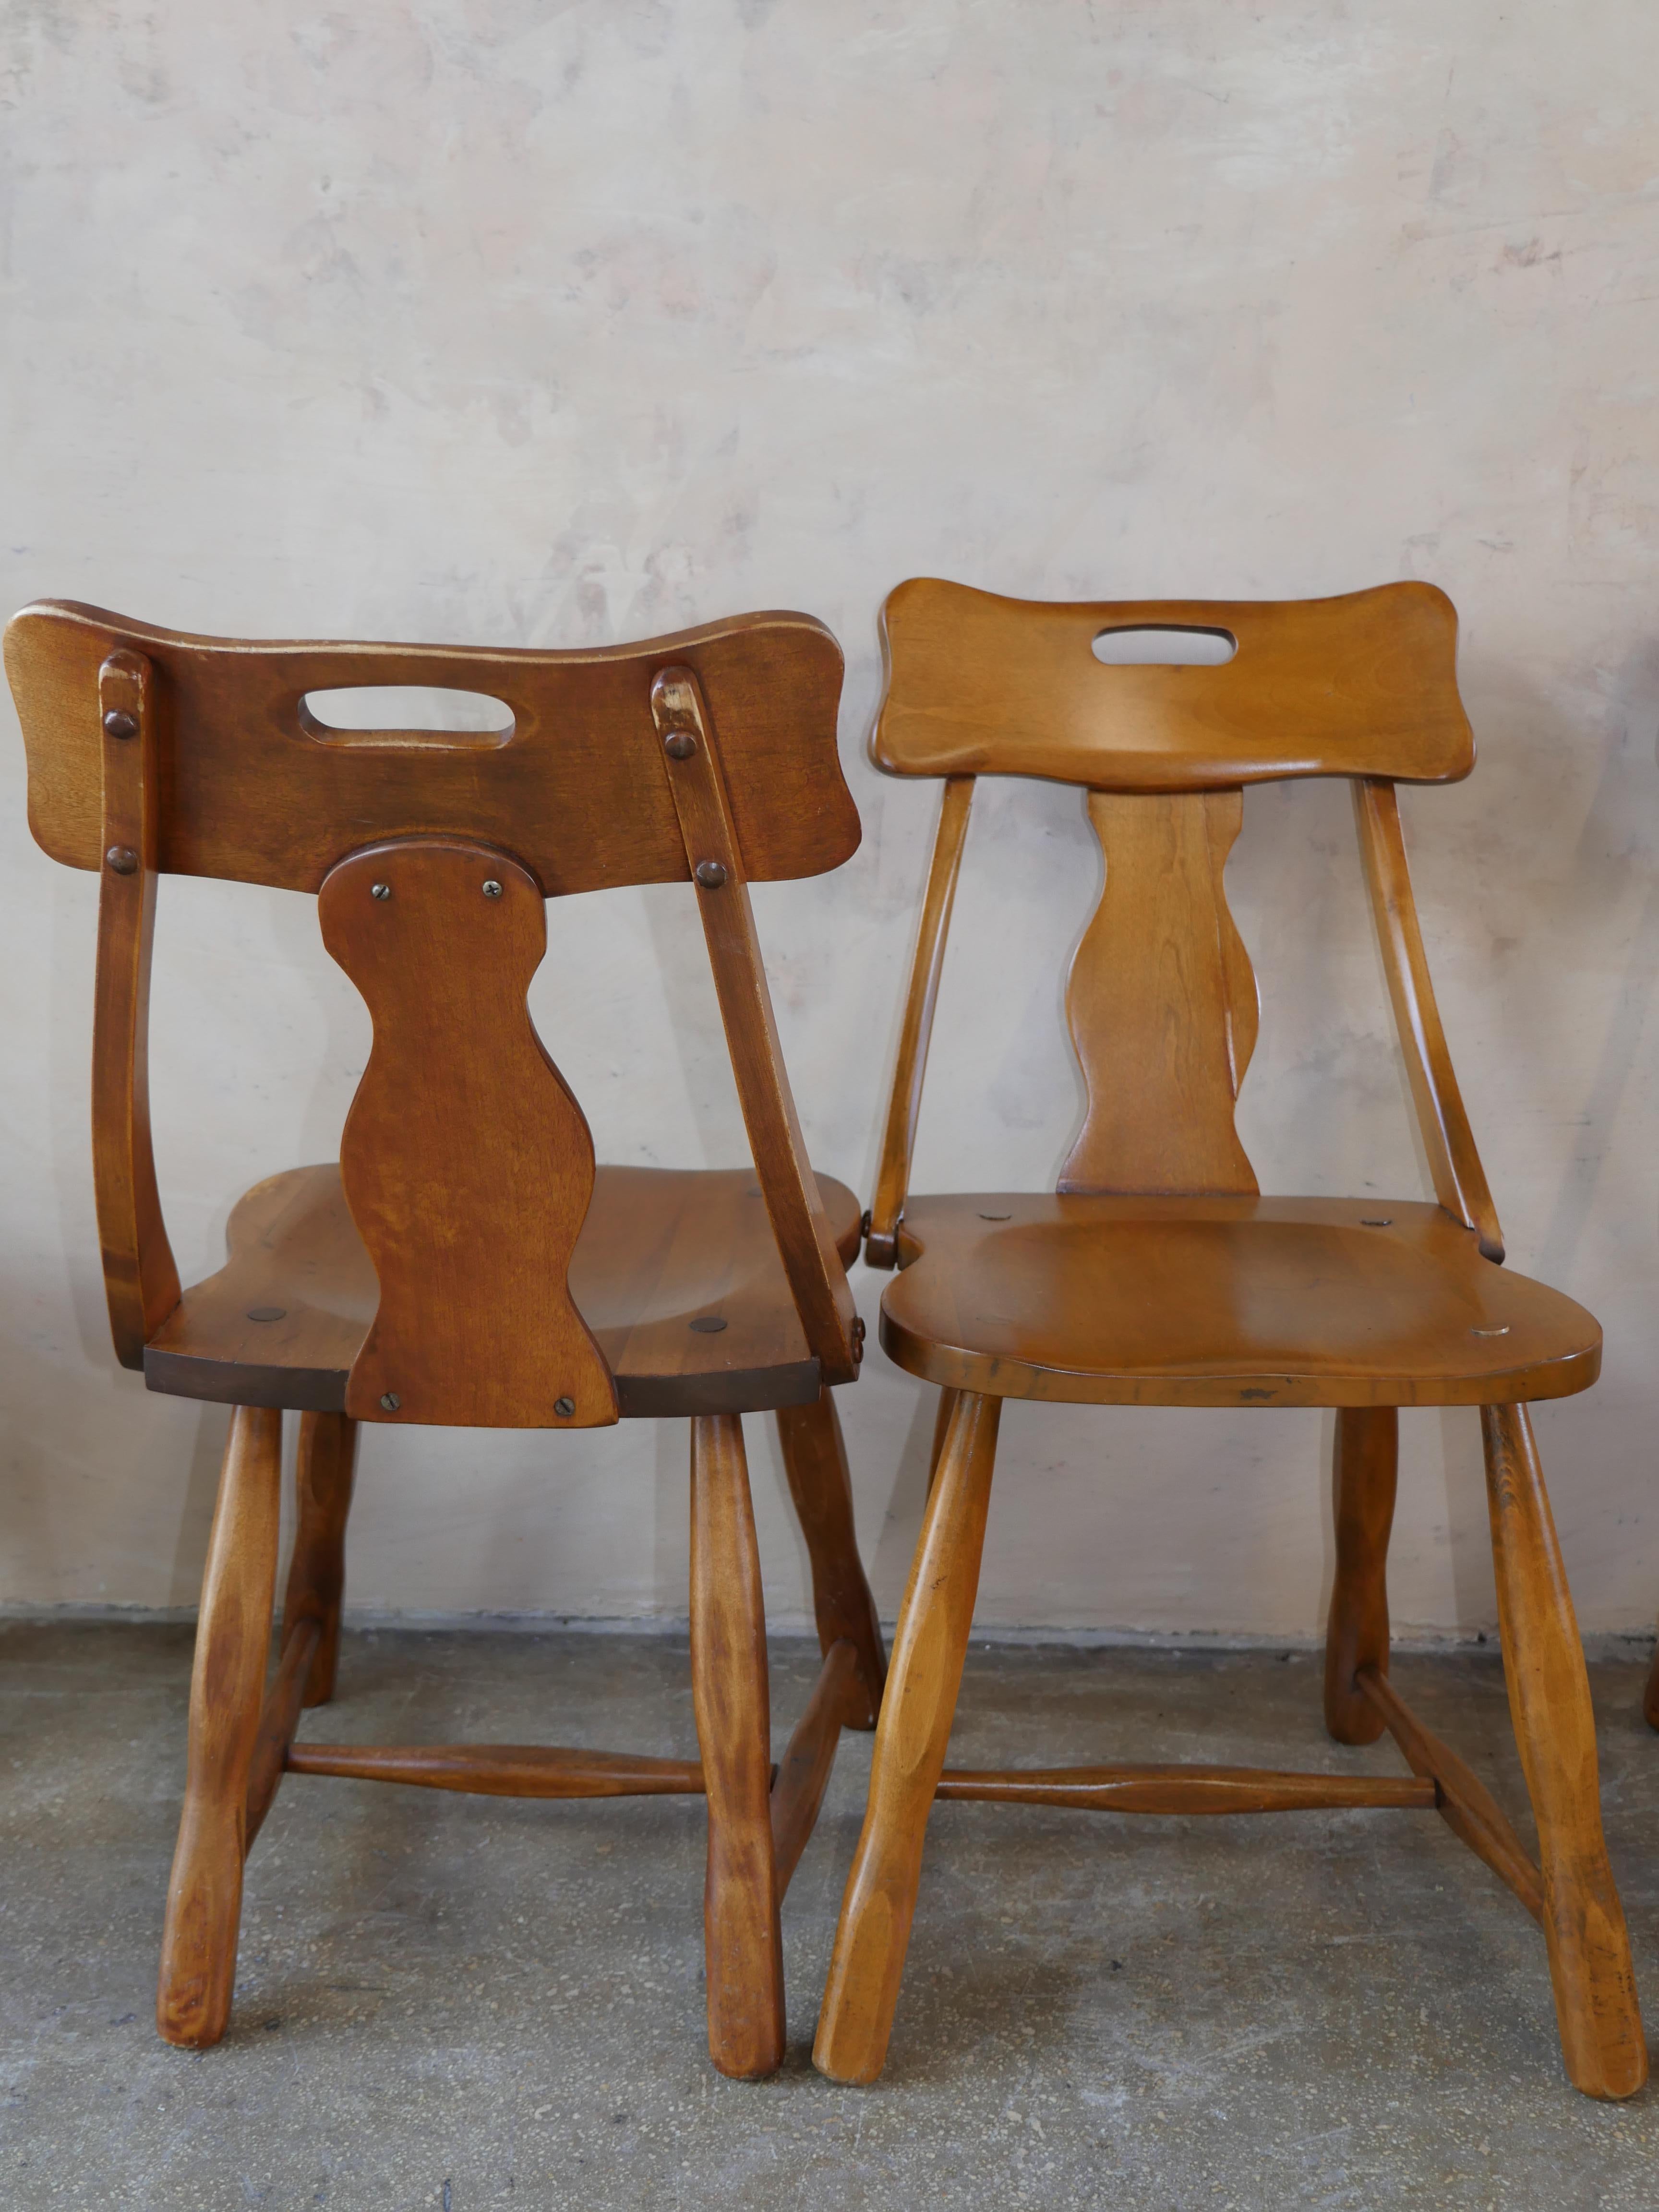 American 1950s Mid-Century Maple Wood Dining Chairs - Set of 4 